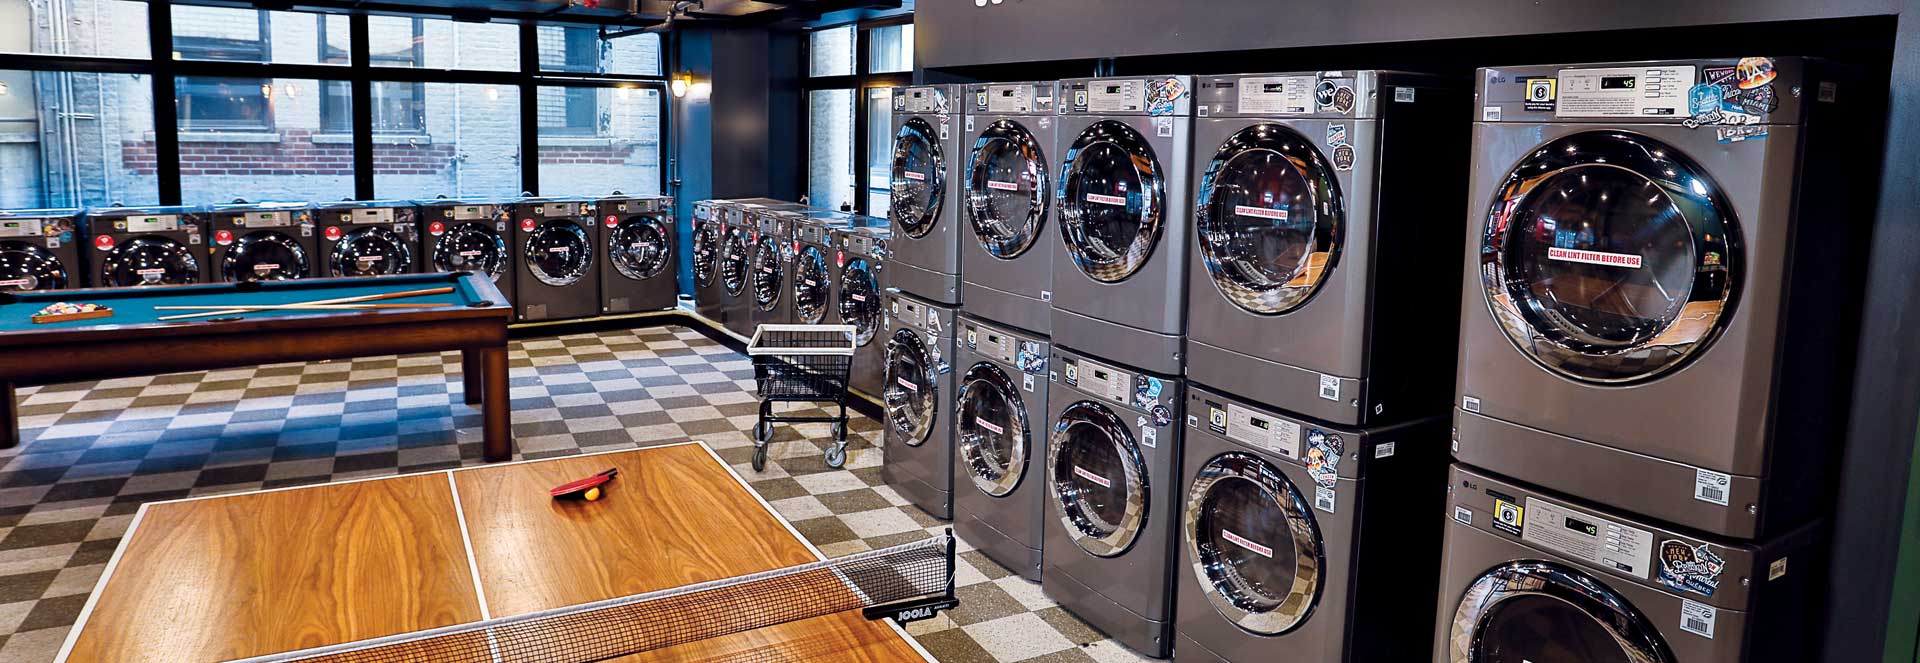 Benefits of On-Premises Laundry for Apartment Buildings